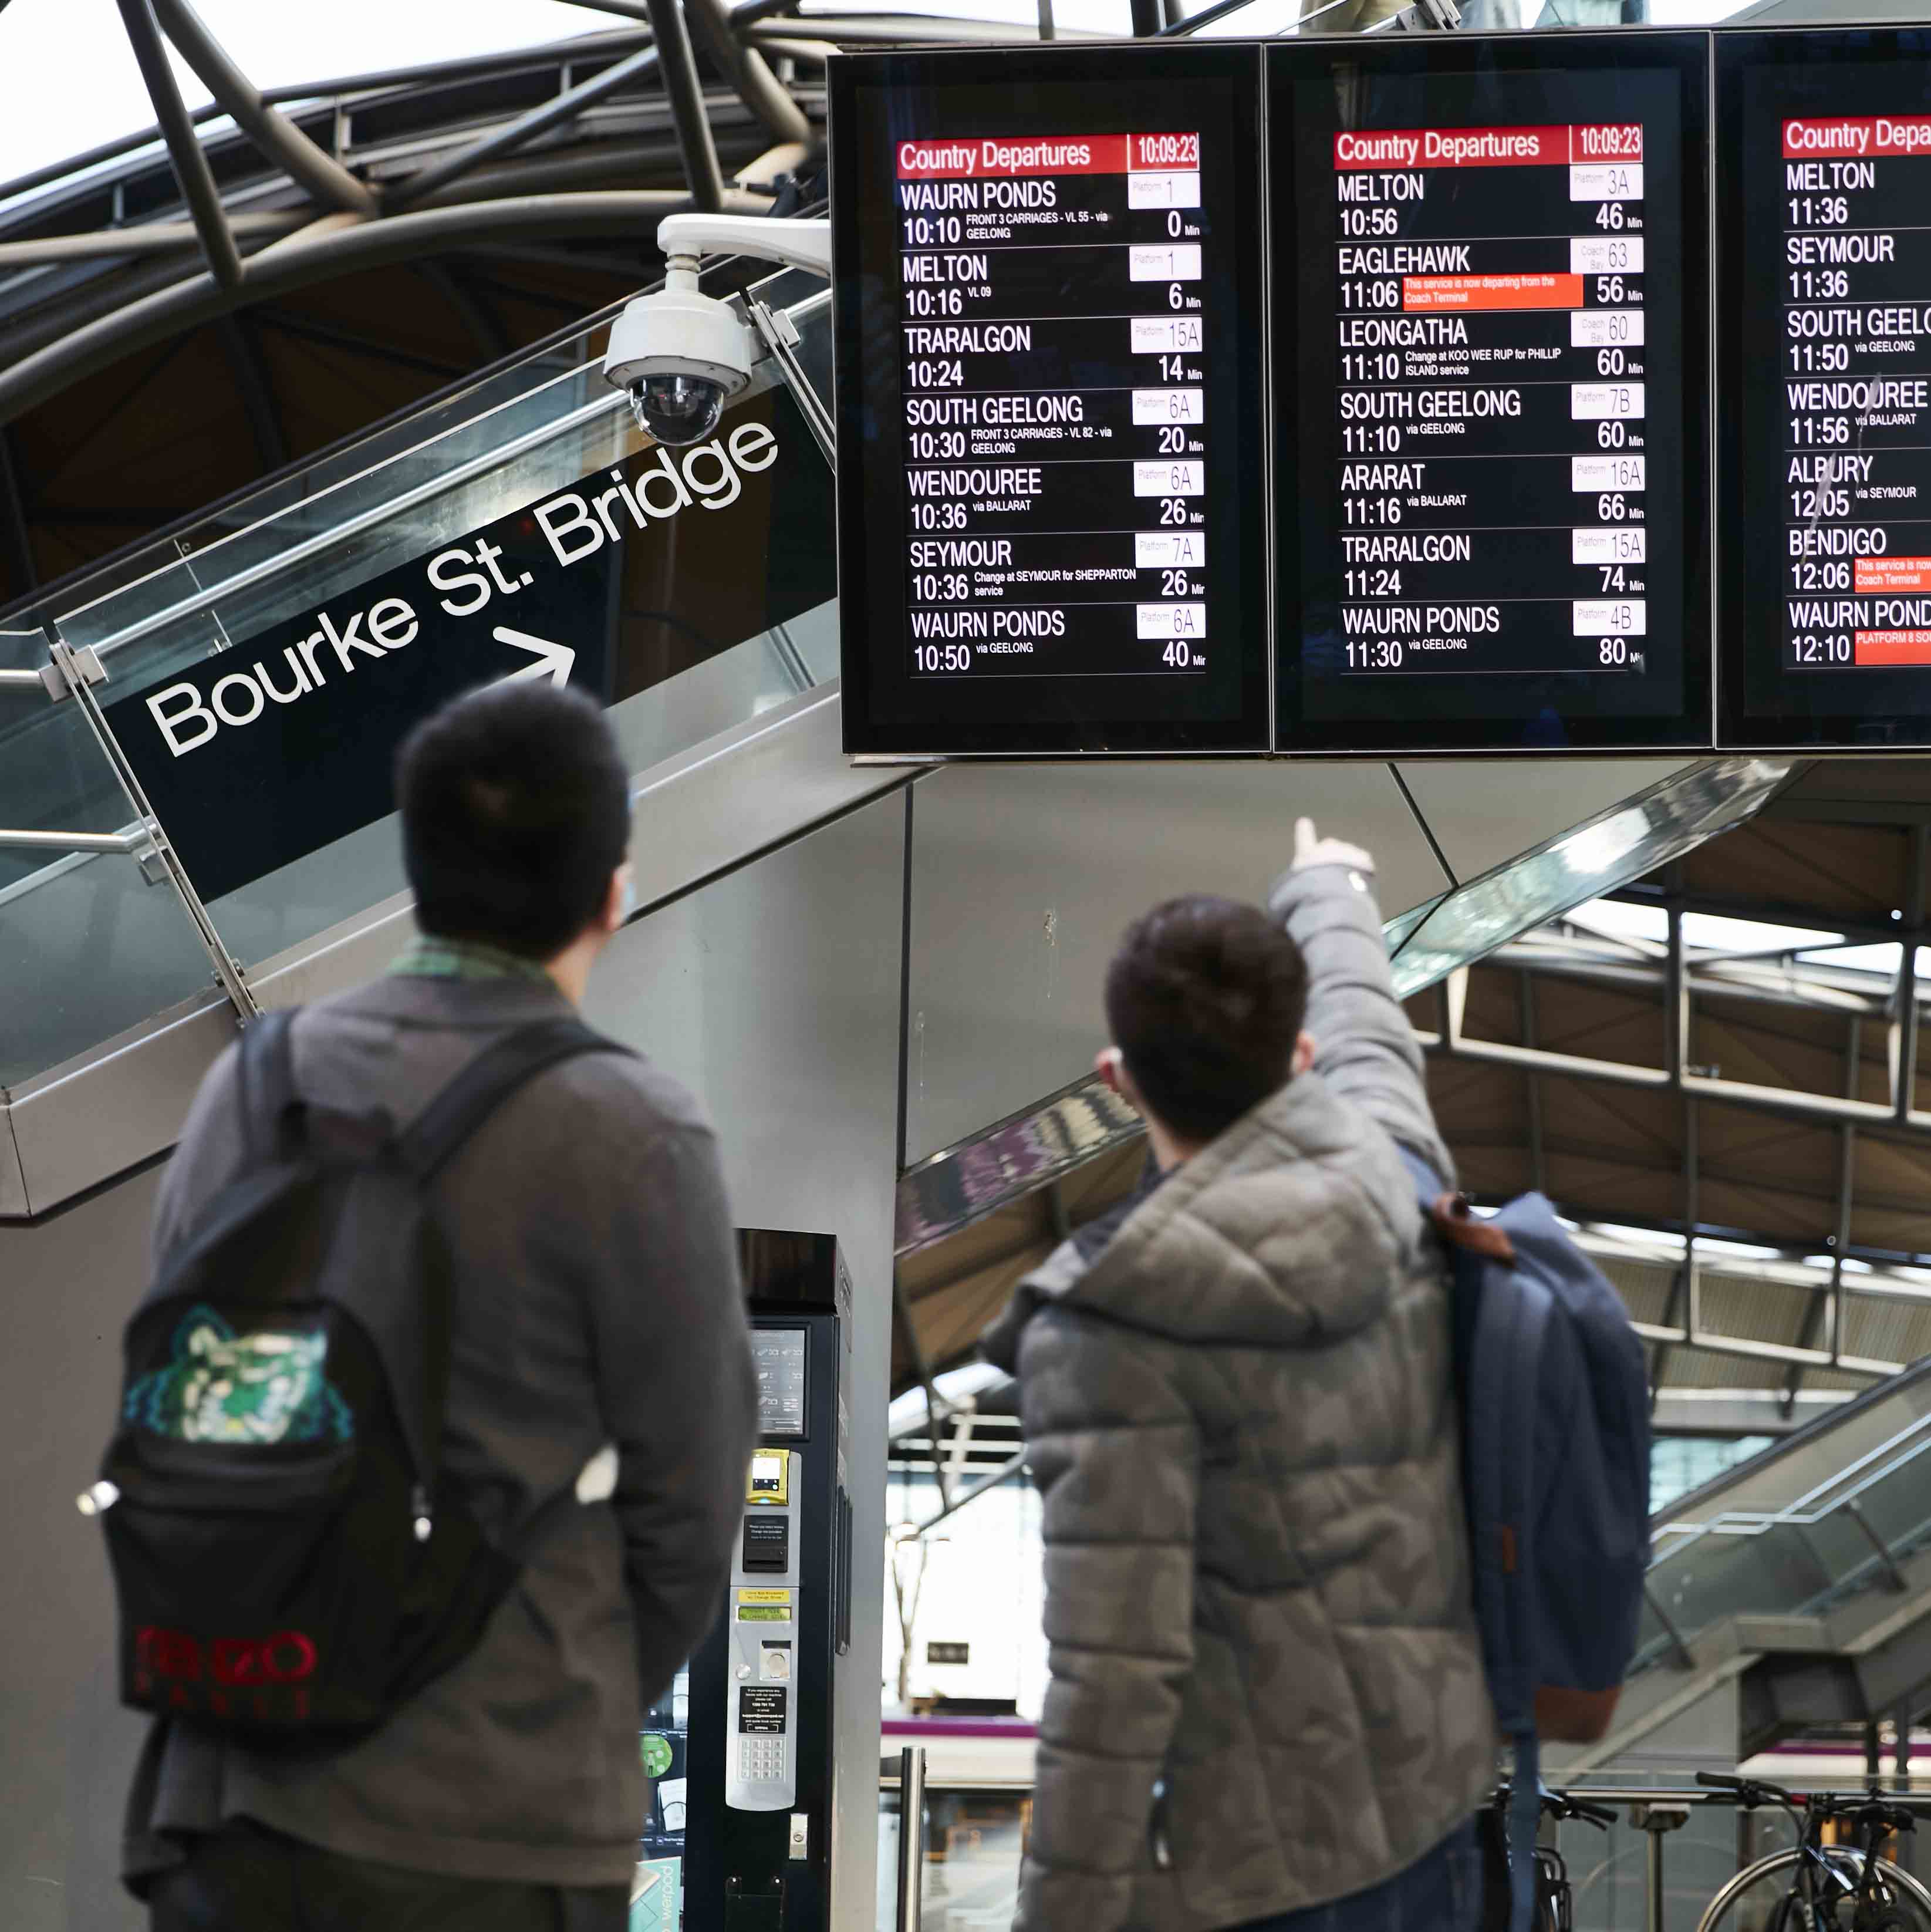 Image is a photograph of two people looking at the train departure displays at Southern Cross Station. The person on the right is pointing at the displays.